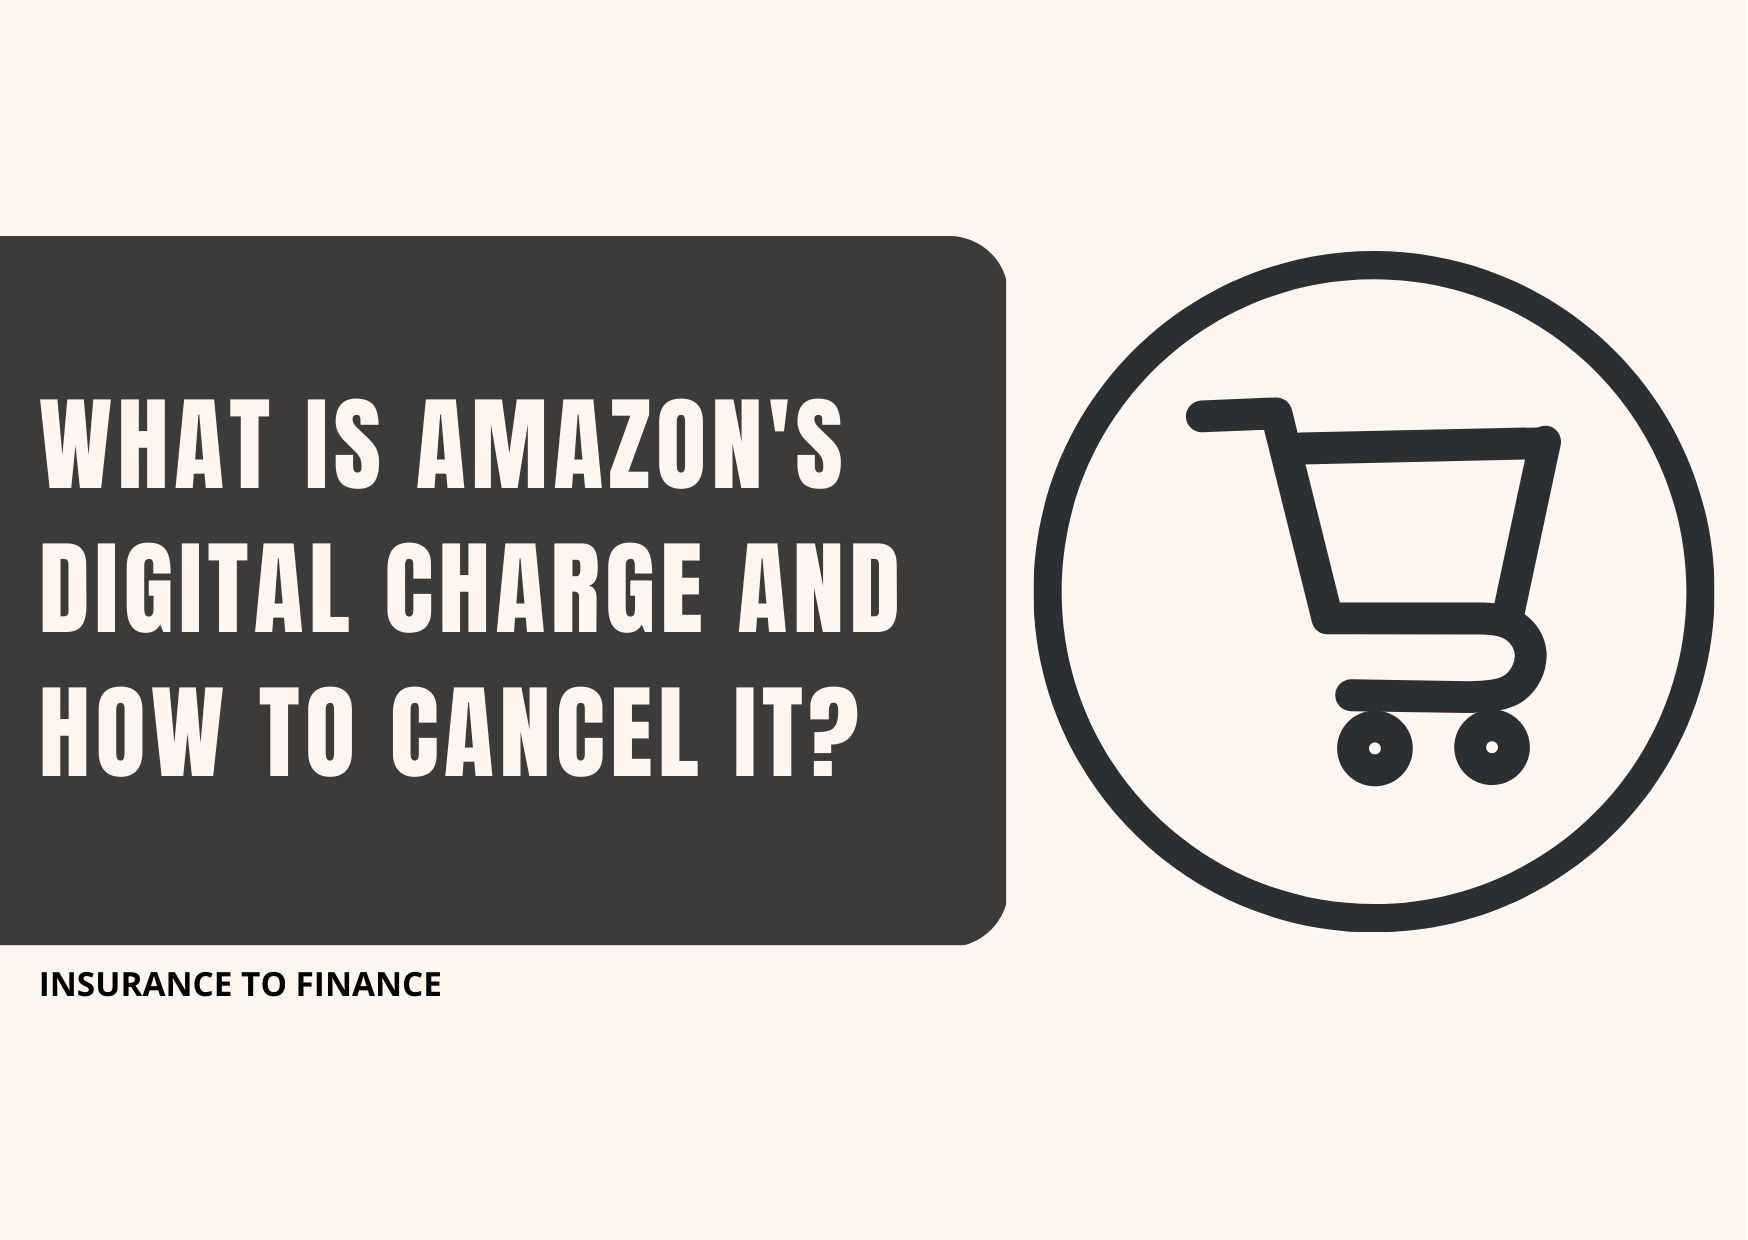 What is Amazon's digital charge and how to cancel it?